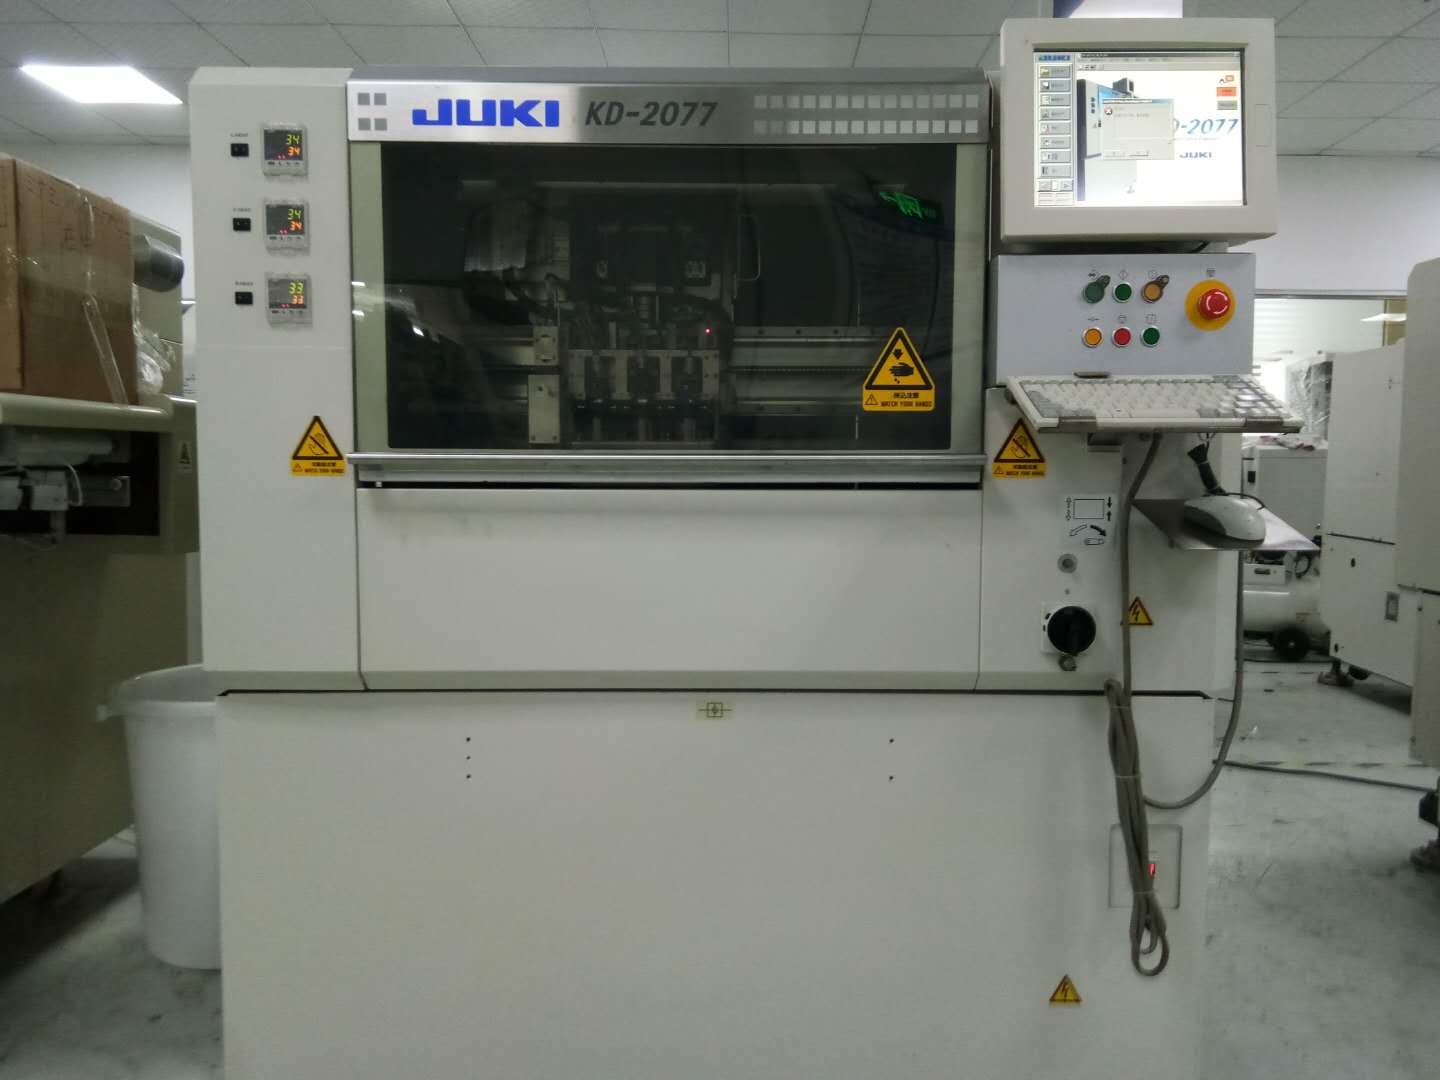 The SMT technician will tell you the characteristics of the multifunctional SMT machine